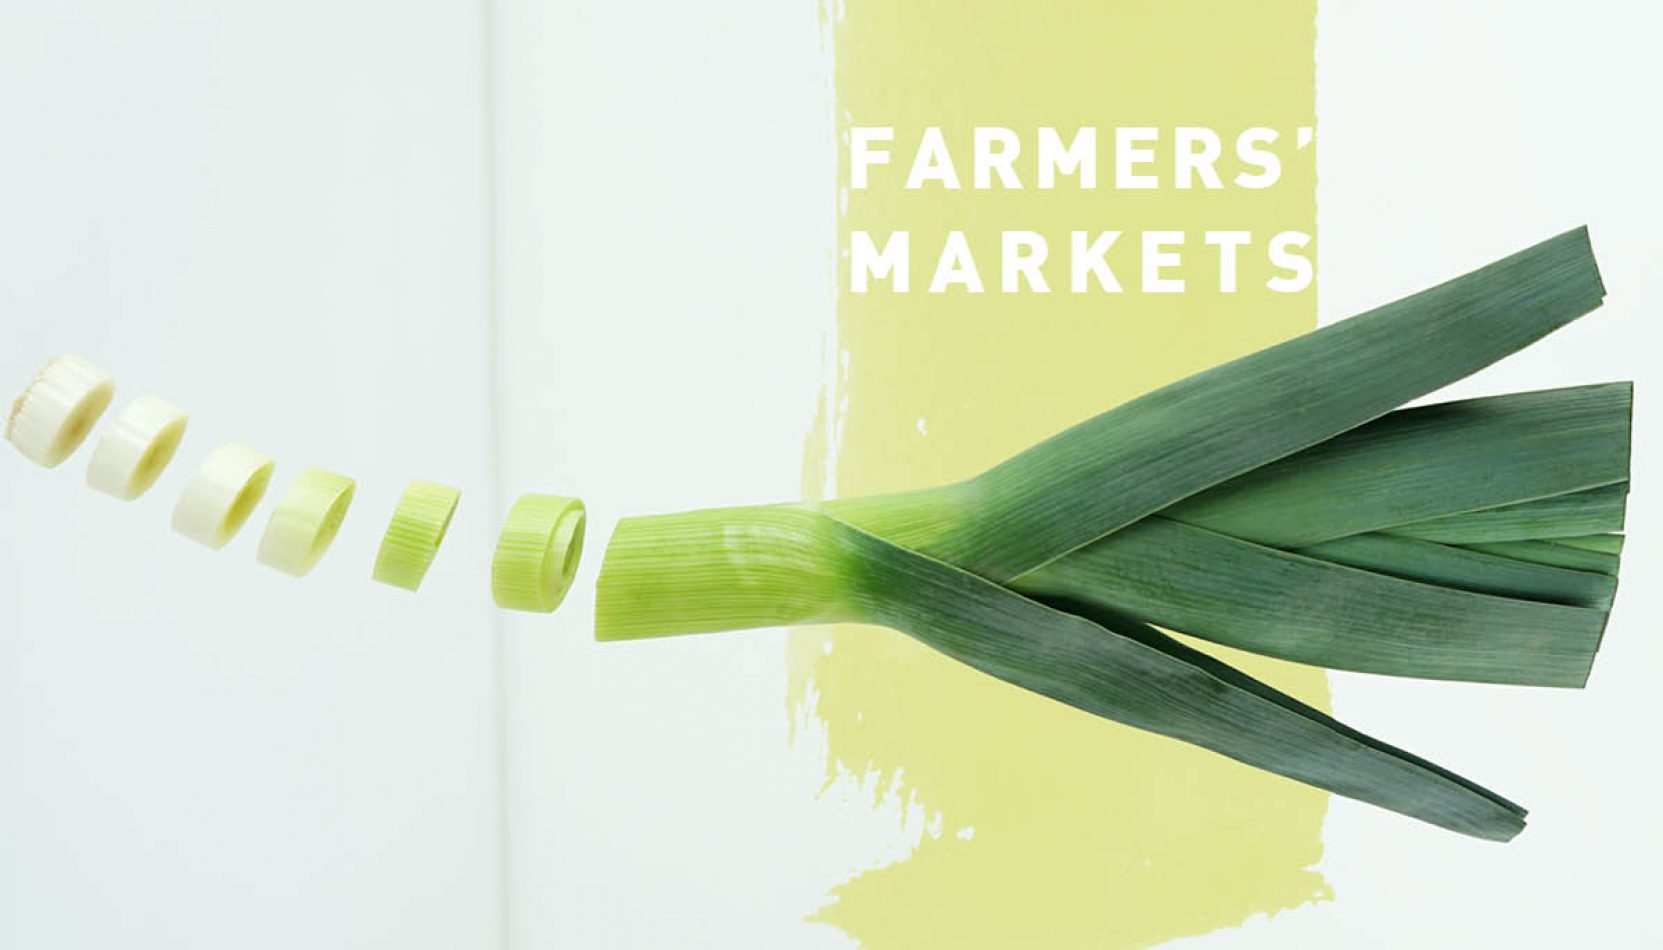 farmers markets, foodie markets, march 2022, guide, guide, guide to surrey, guide to farmers markets